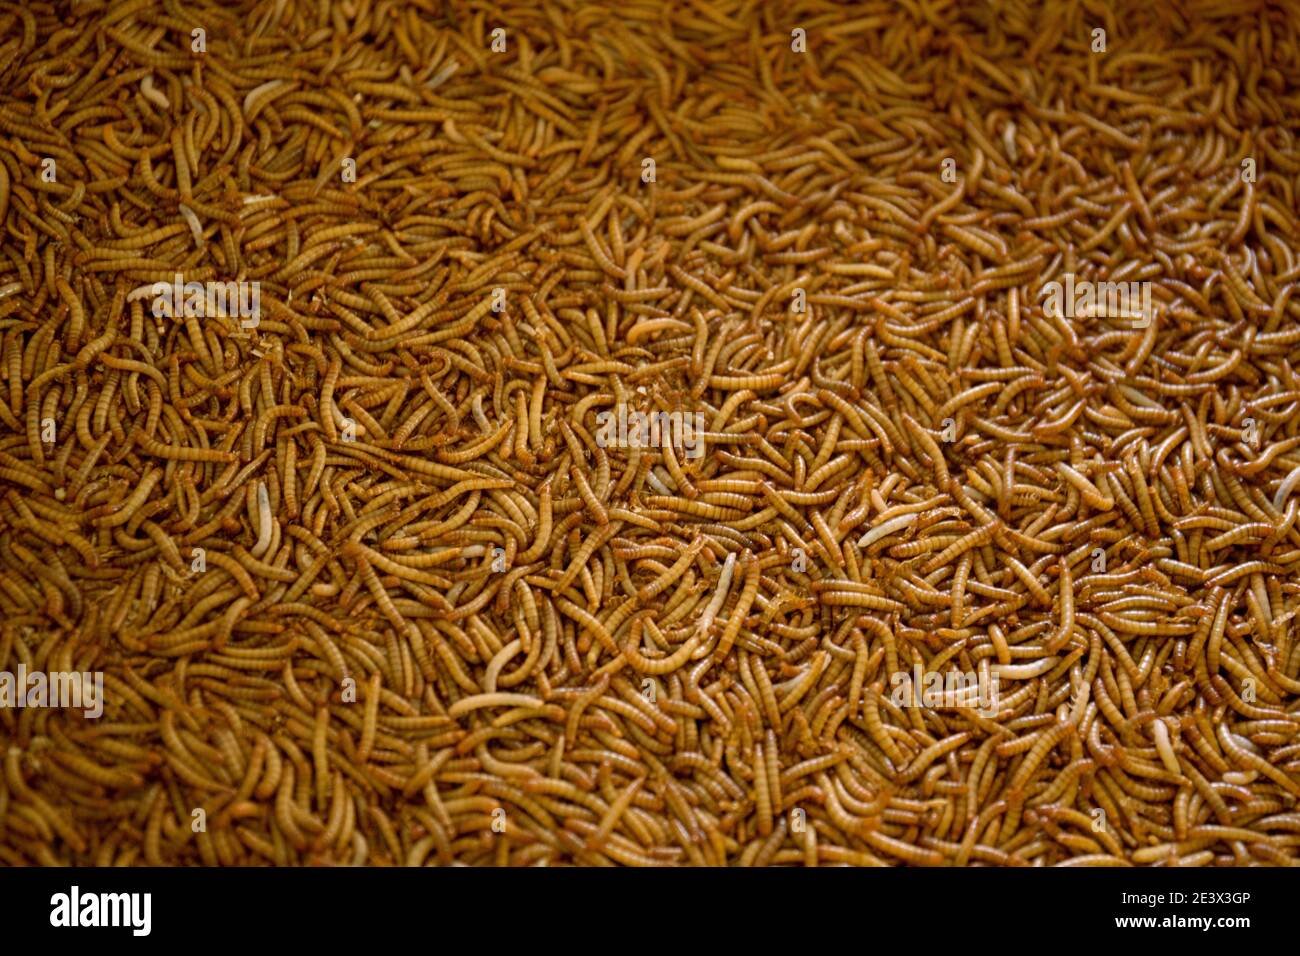 Many living Mealworm larvae suitable as Food Stock Photo